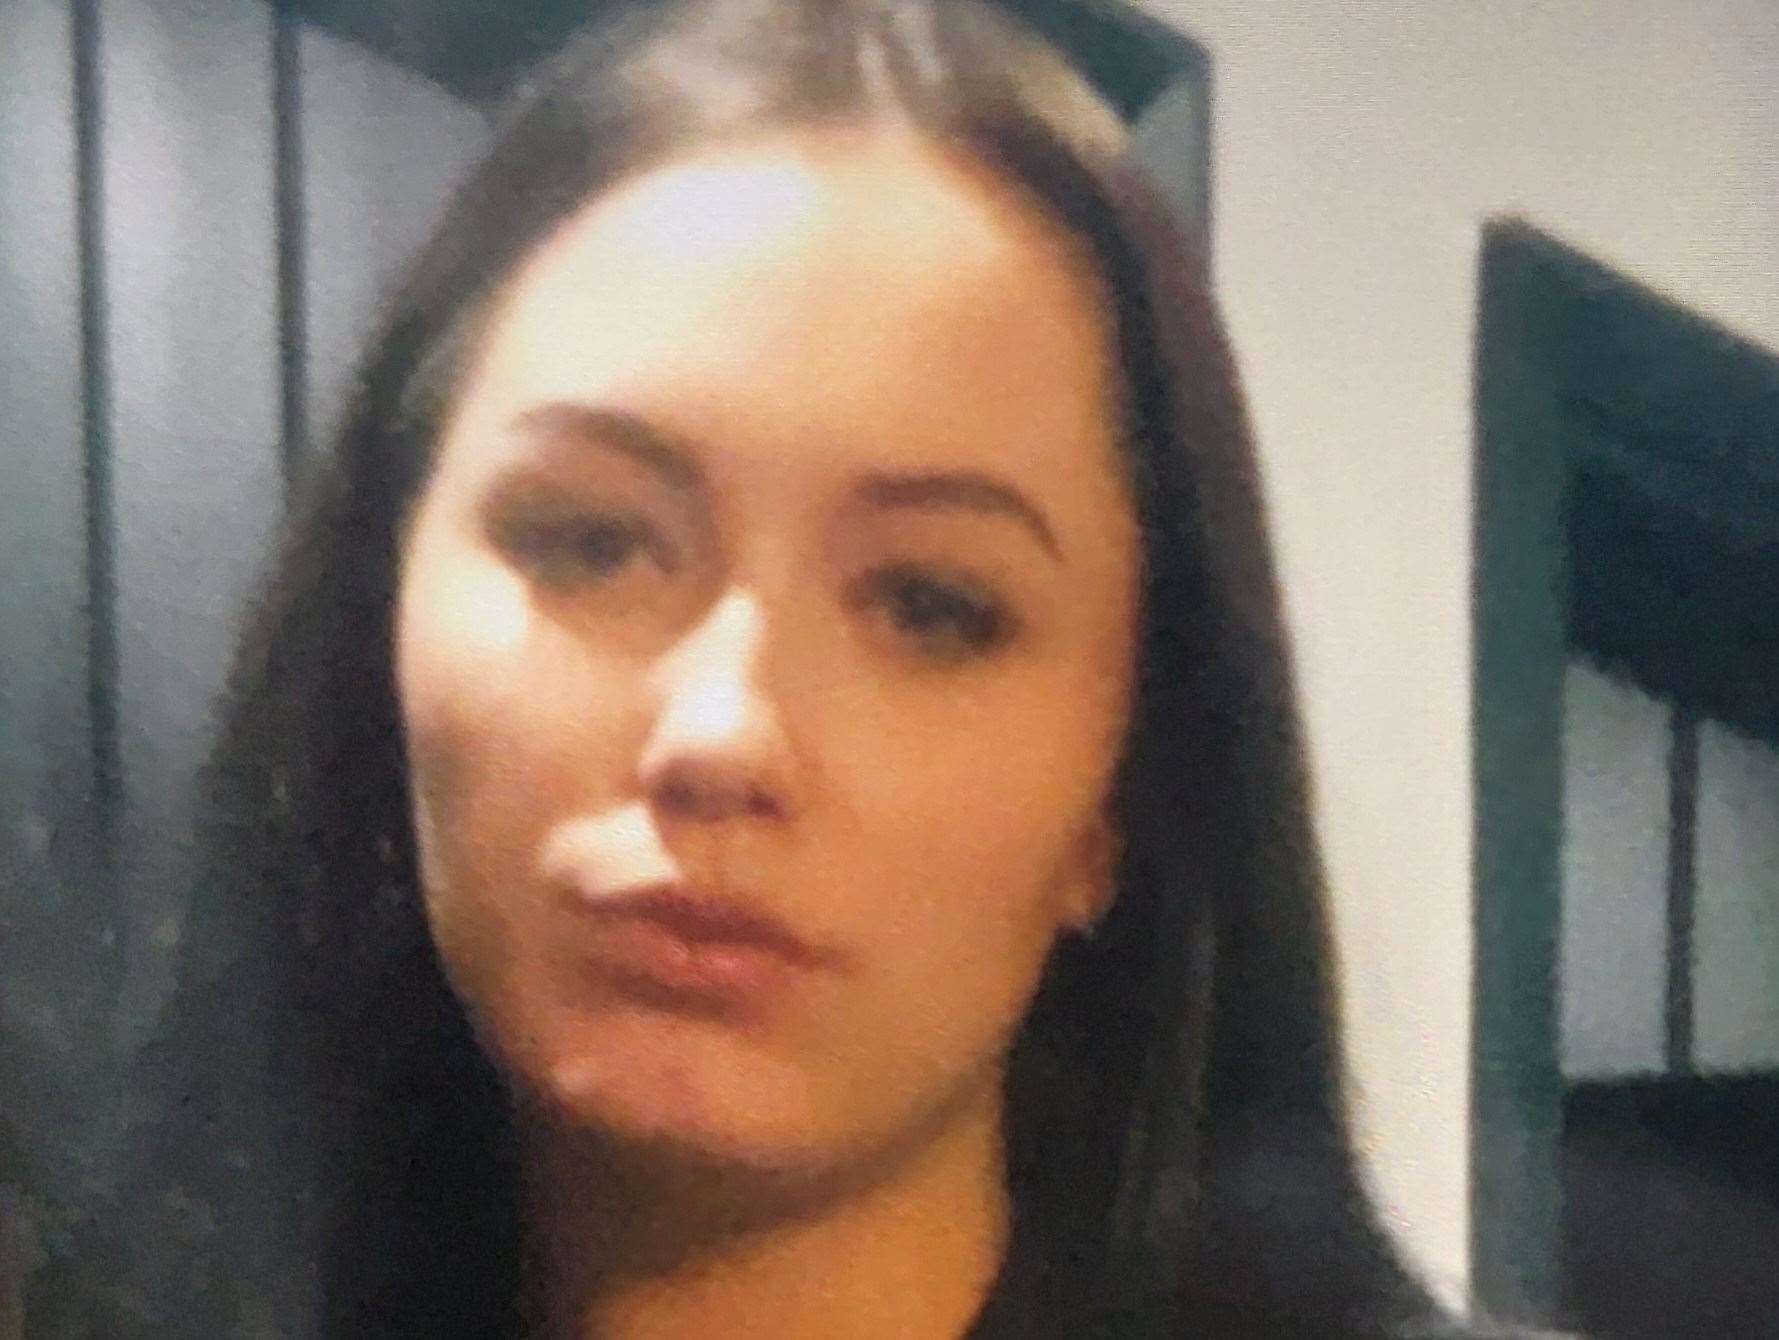 Aimee May, who is 23, has been reported as missing. Picture: Kent Police